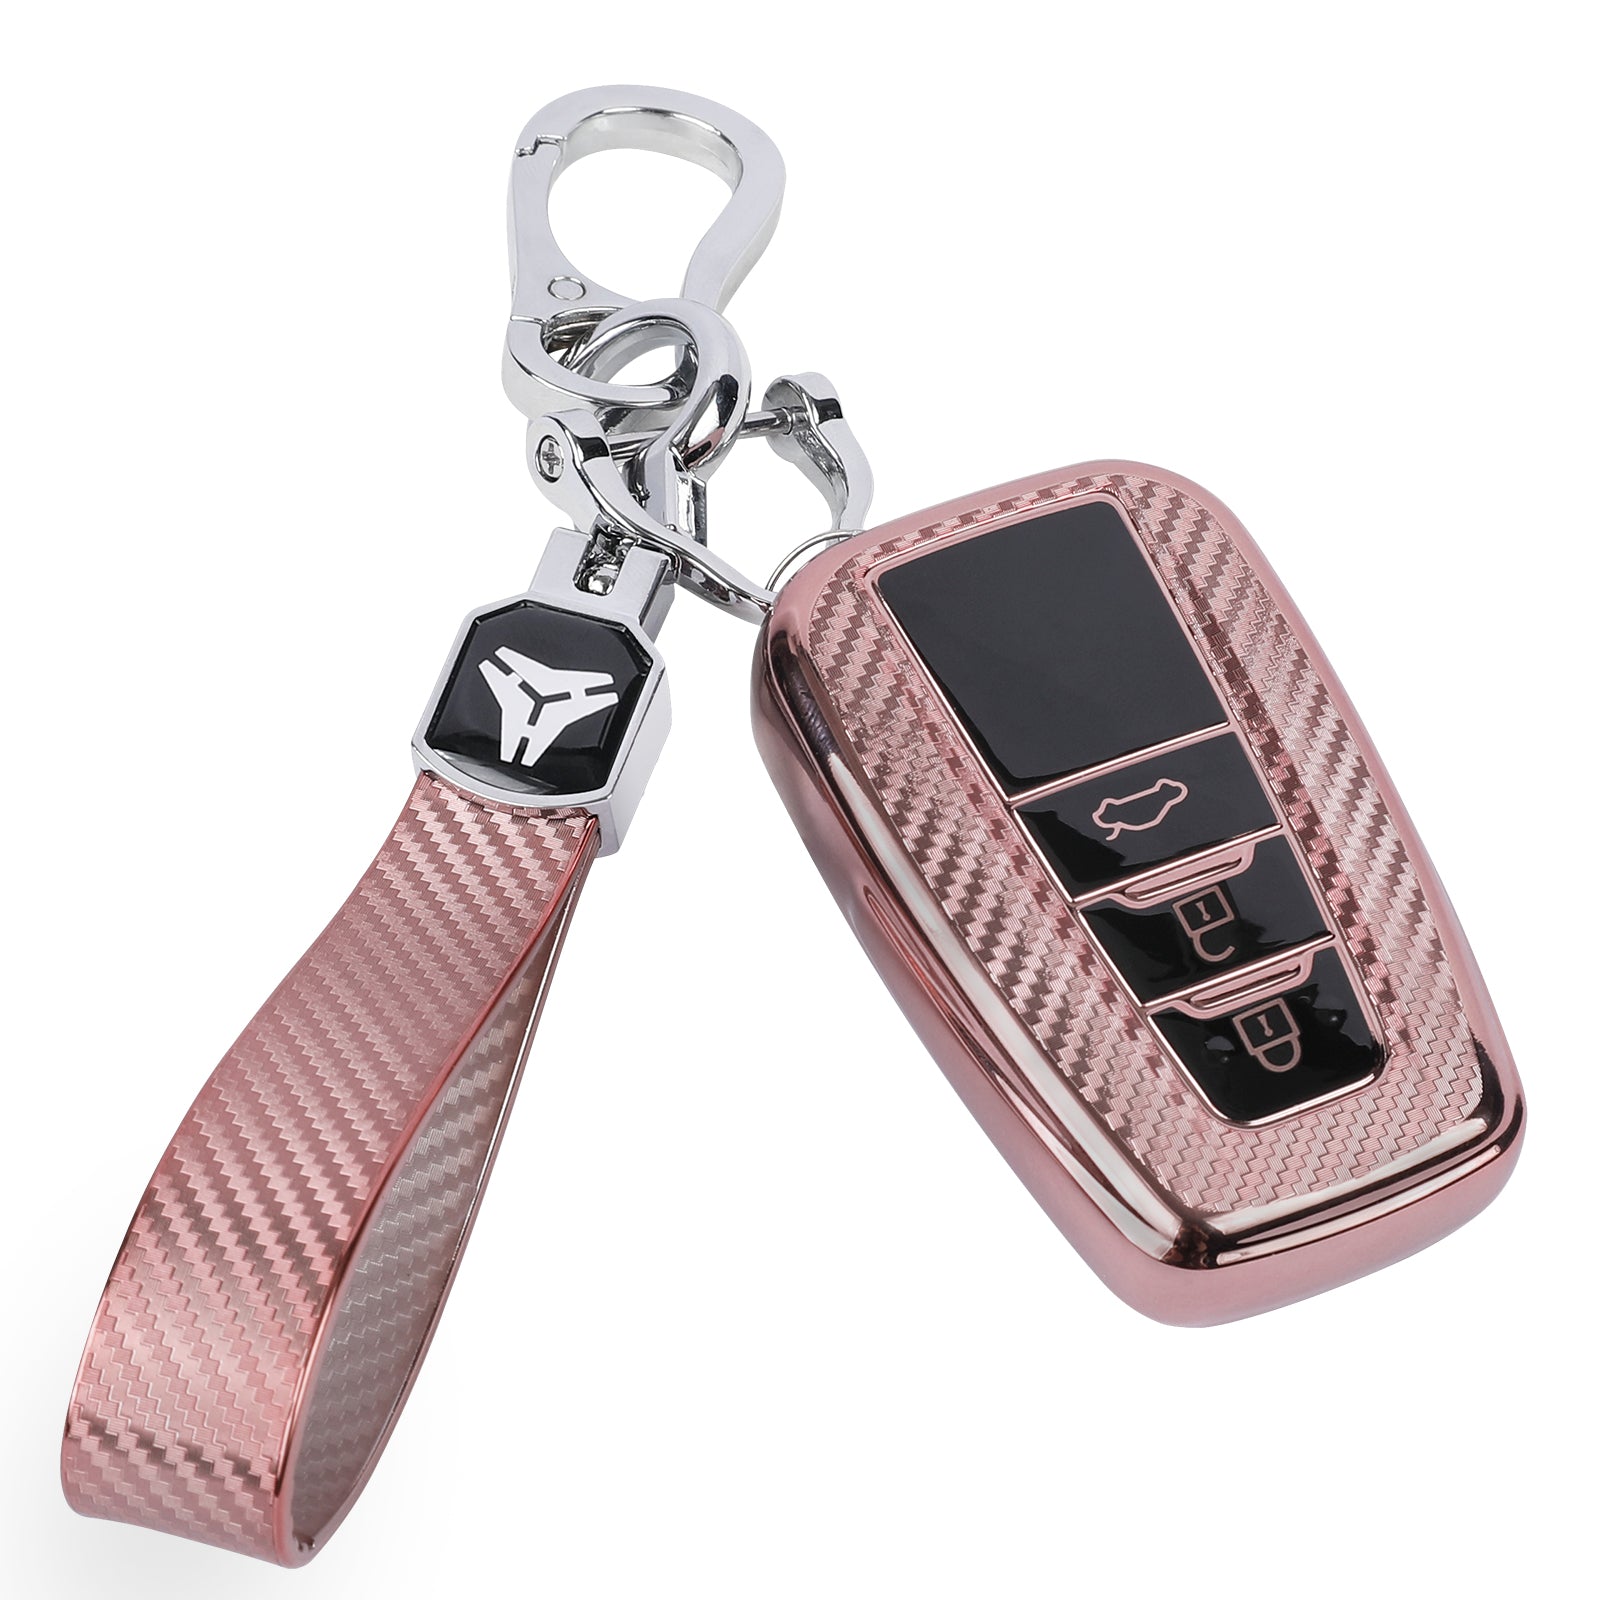 Key Fob Cover for Toyota with Keychain, Full Cover Protection Soft TPU –  Tang Town